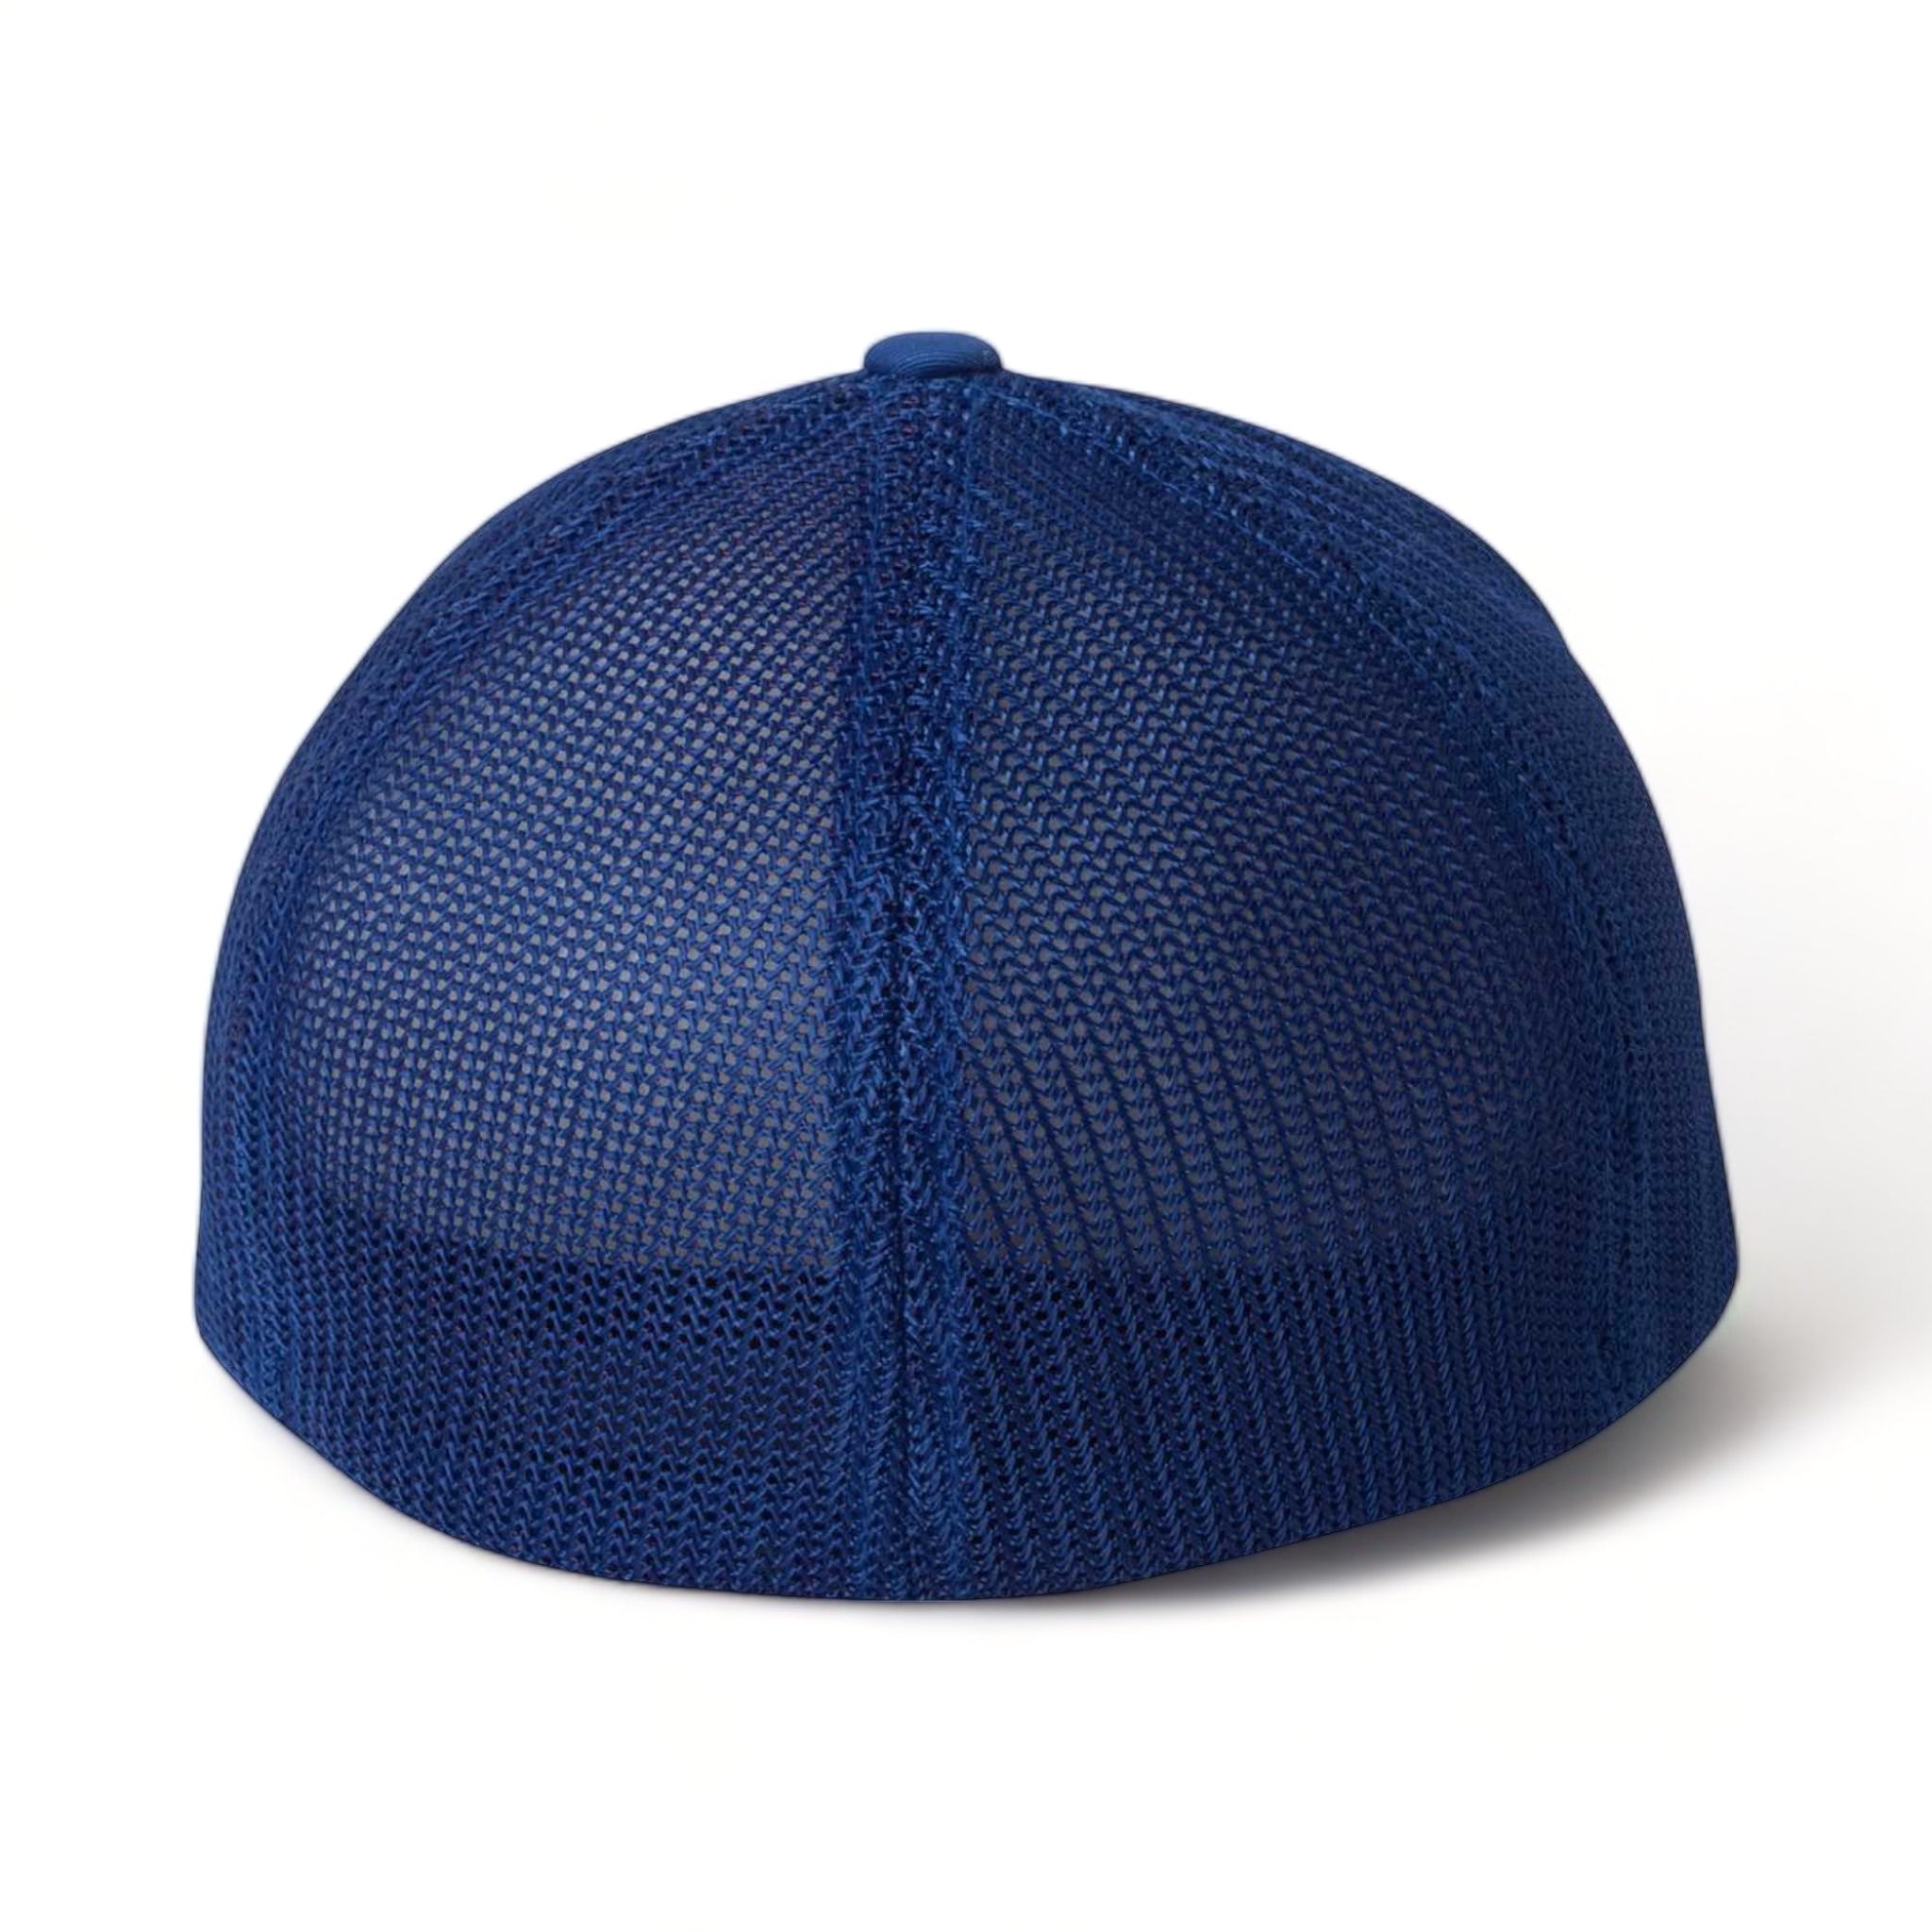 Back view of Flexfit 6511 custom hat in royal and blue